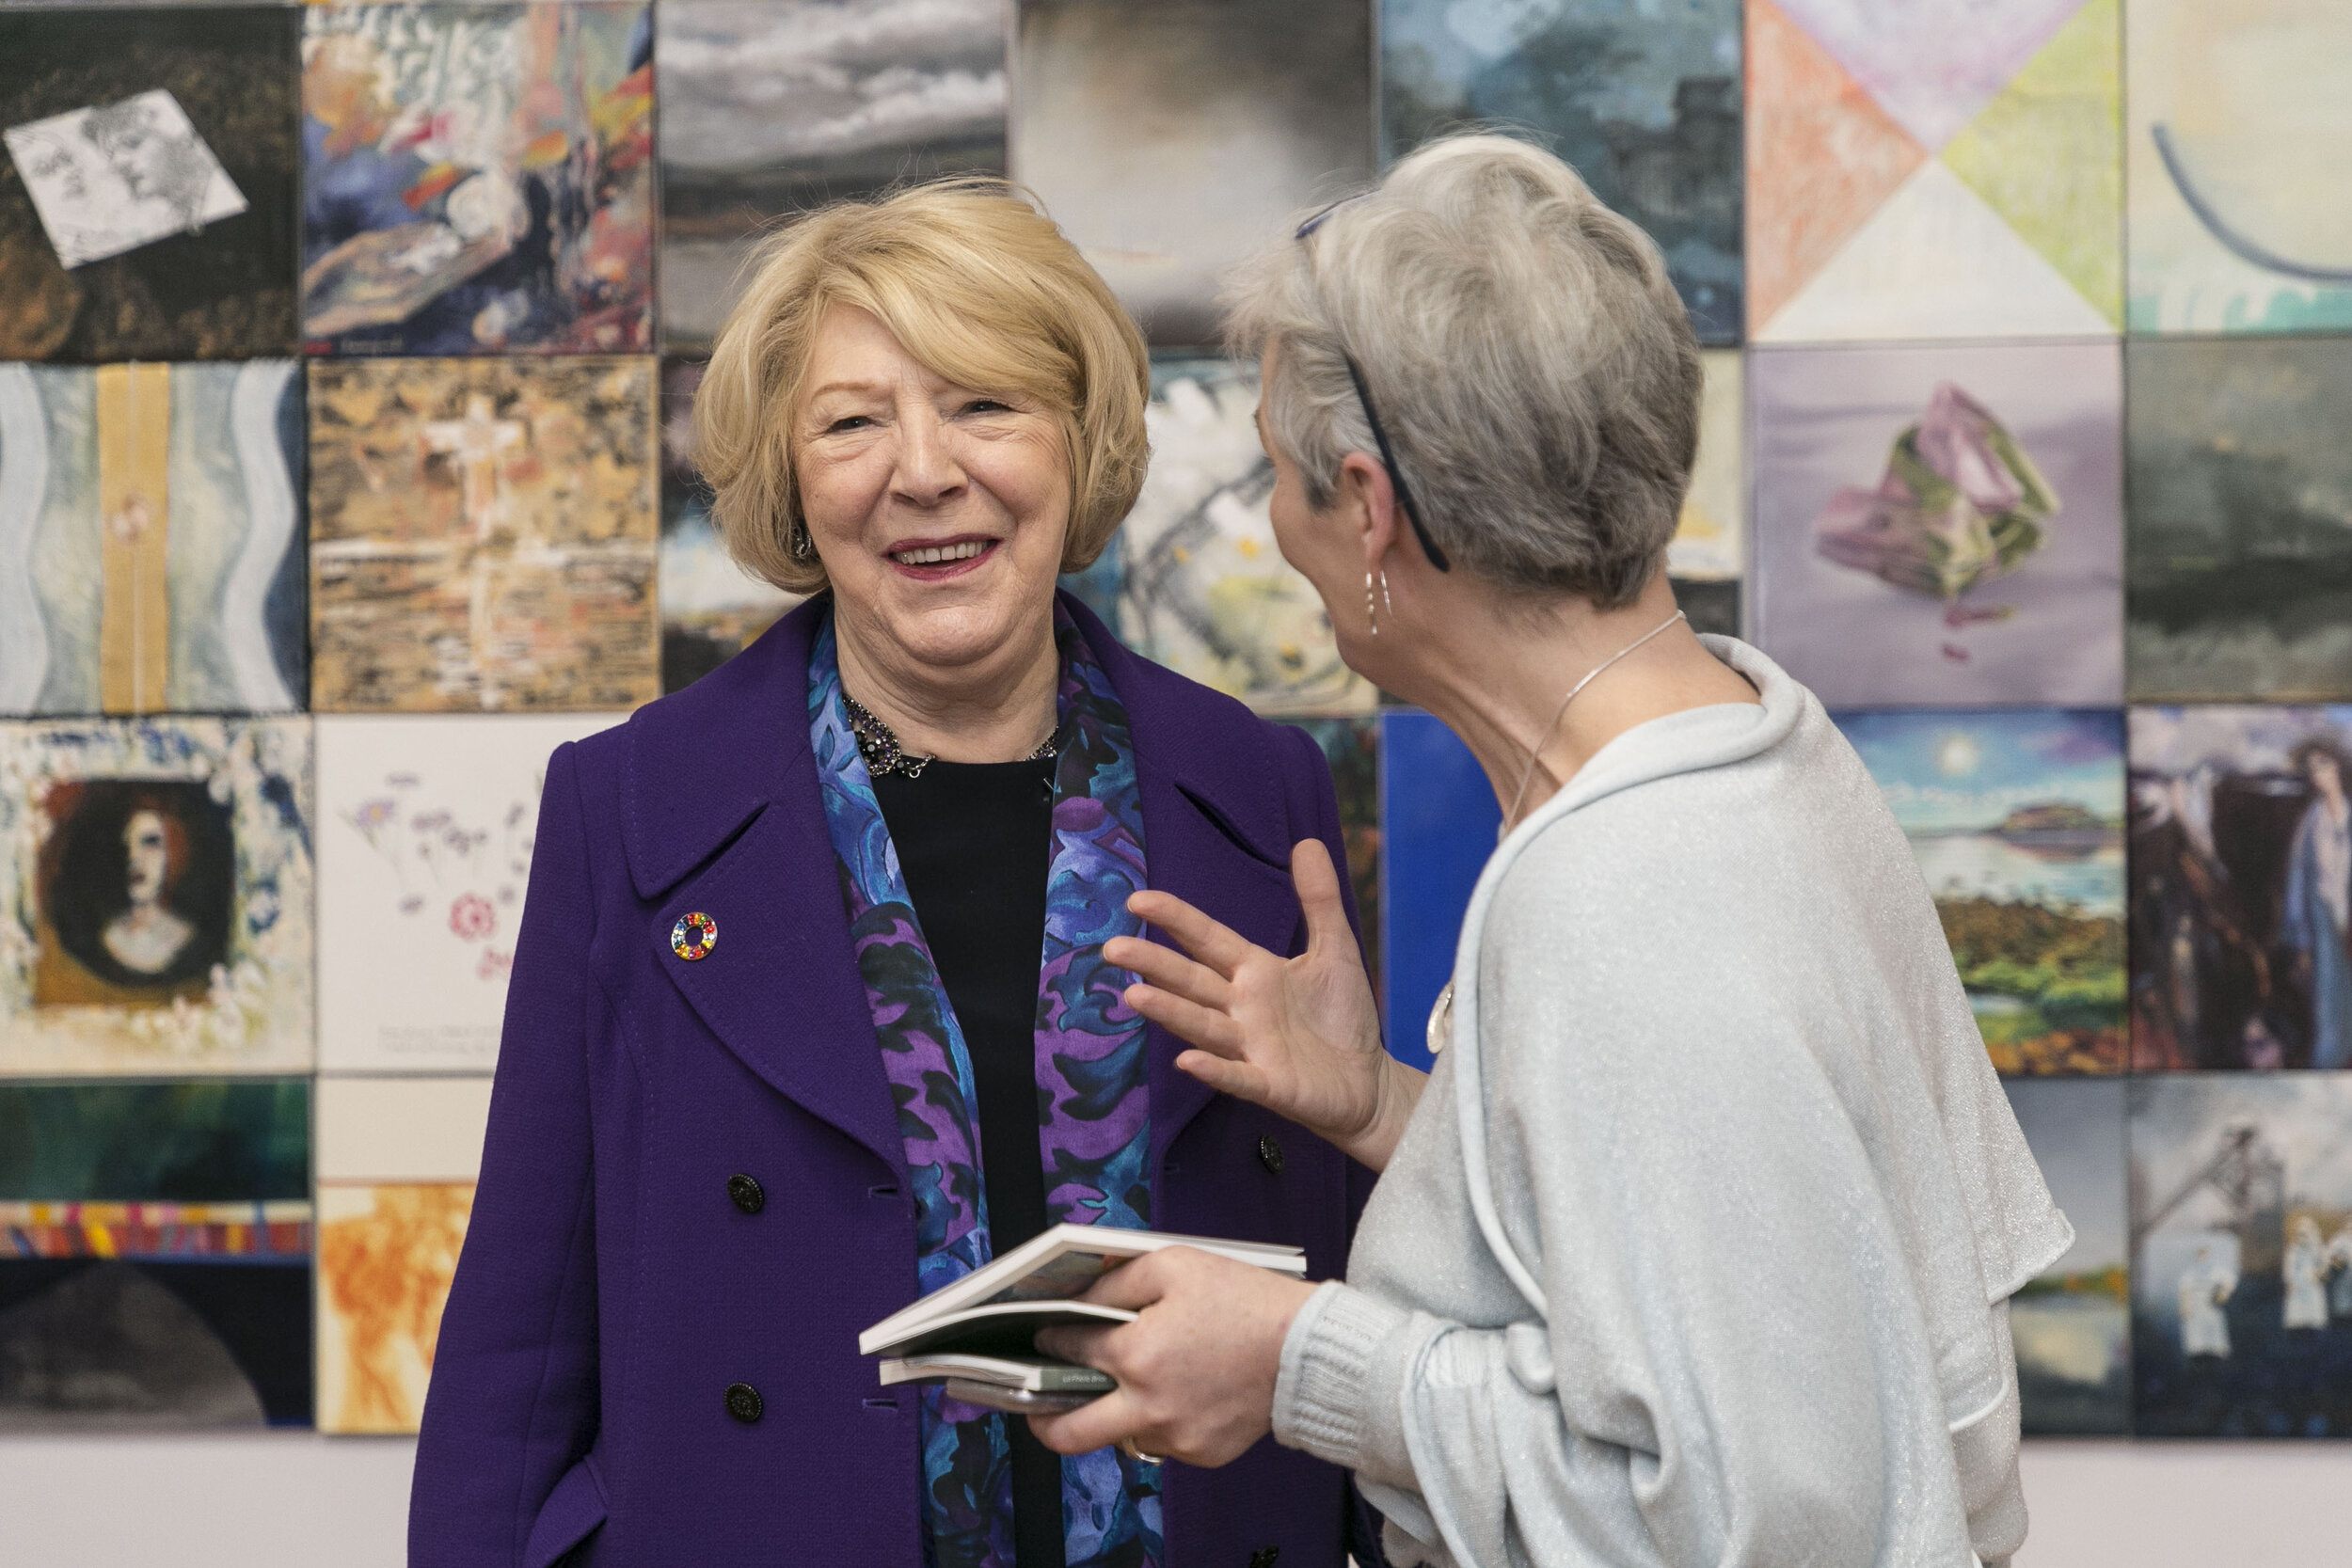  Sabina Higgins and Hamilton Gallery curator Martina Hamilton.      Hamilton Gallery / MoLi / DFAT - exhibition opening by Sabina Higgins of "Eva Gore-Booth 93 Irish women artists respond to her life and work", part of Brigids Day Lá Fhéile Bríde, Ce